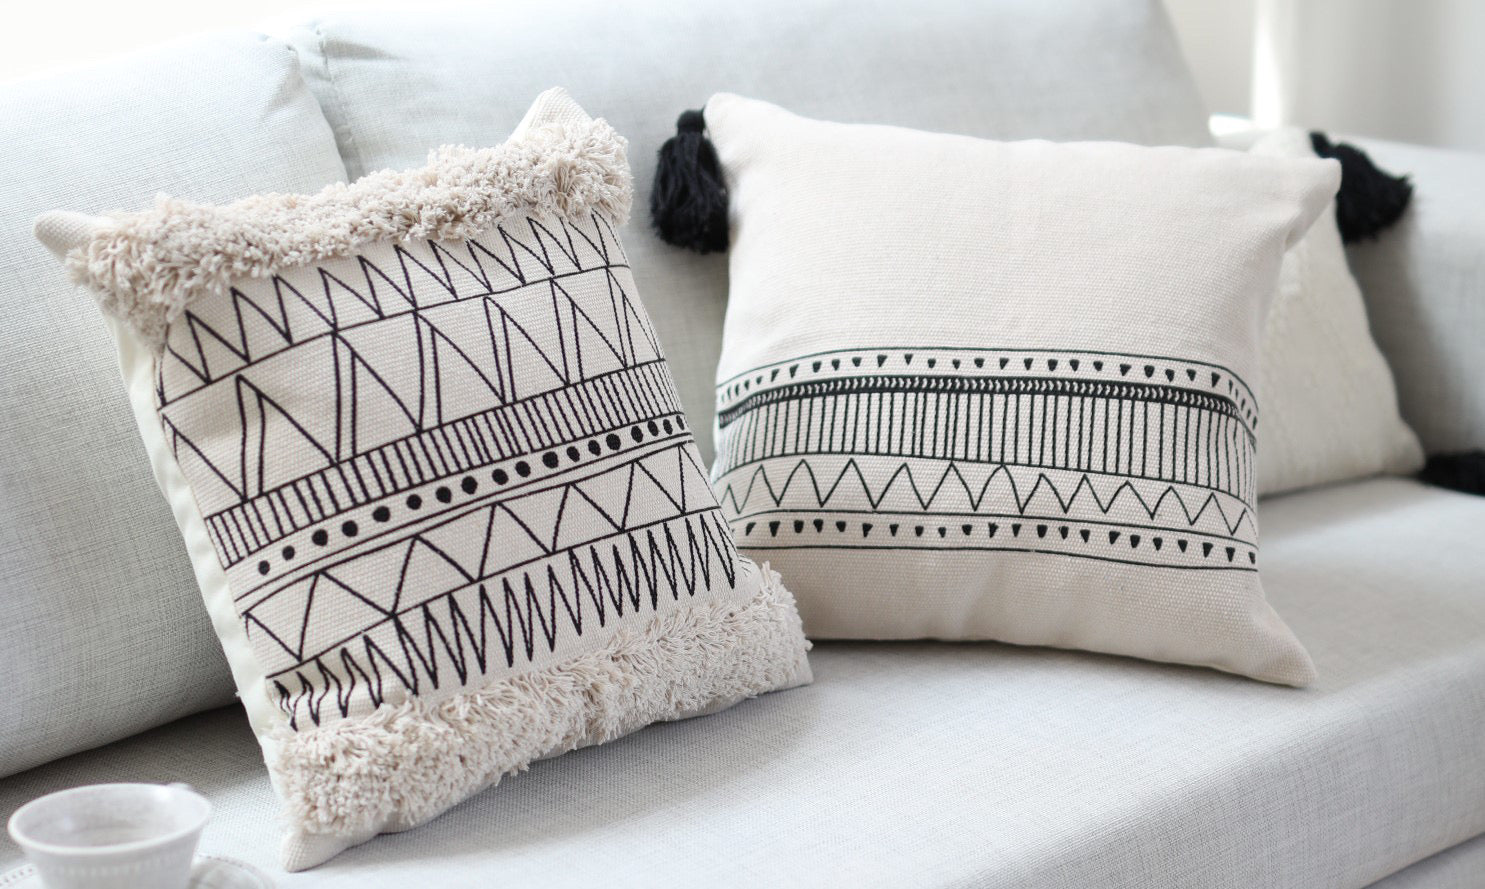 Tufted Pattern Cotton Pillow